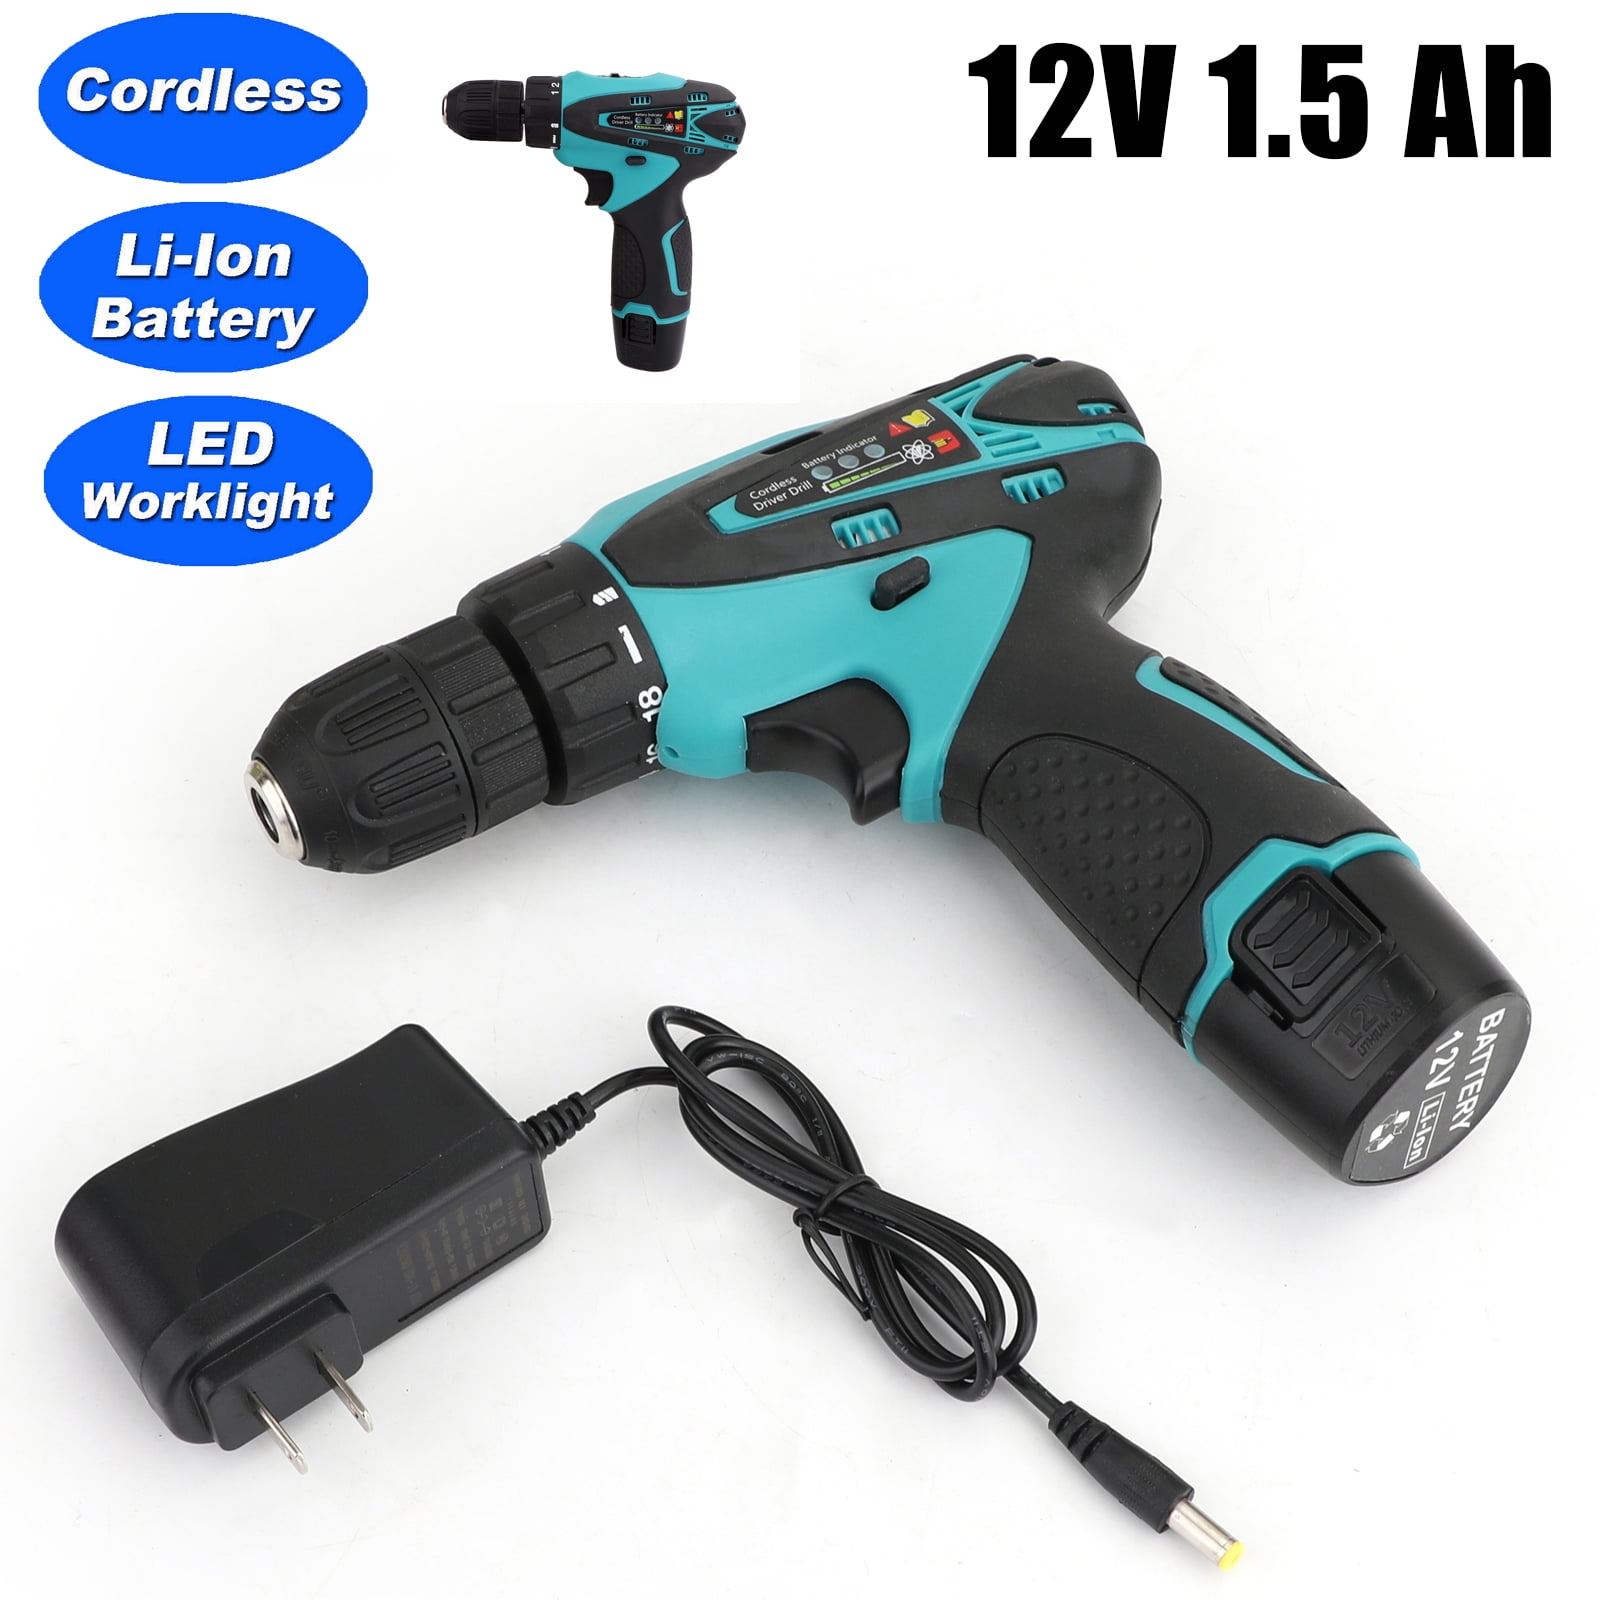 JMG Electric Drill Cordless Screwdriver Lithium Battery Two-Speed Mini  Drill Cordless Screwdriver Power Tools Included Power Charger and Box,2